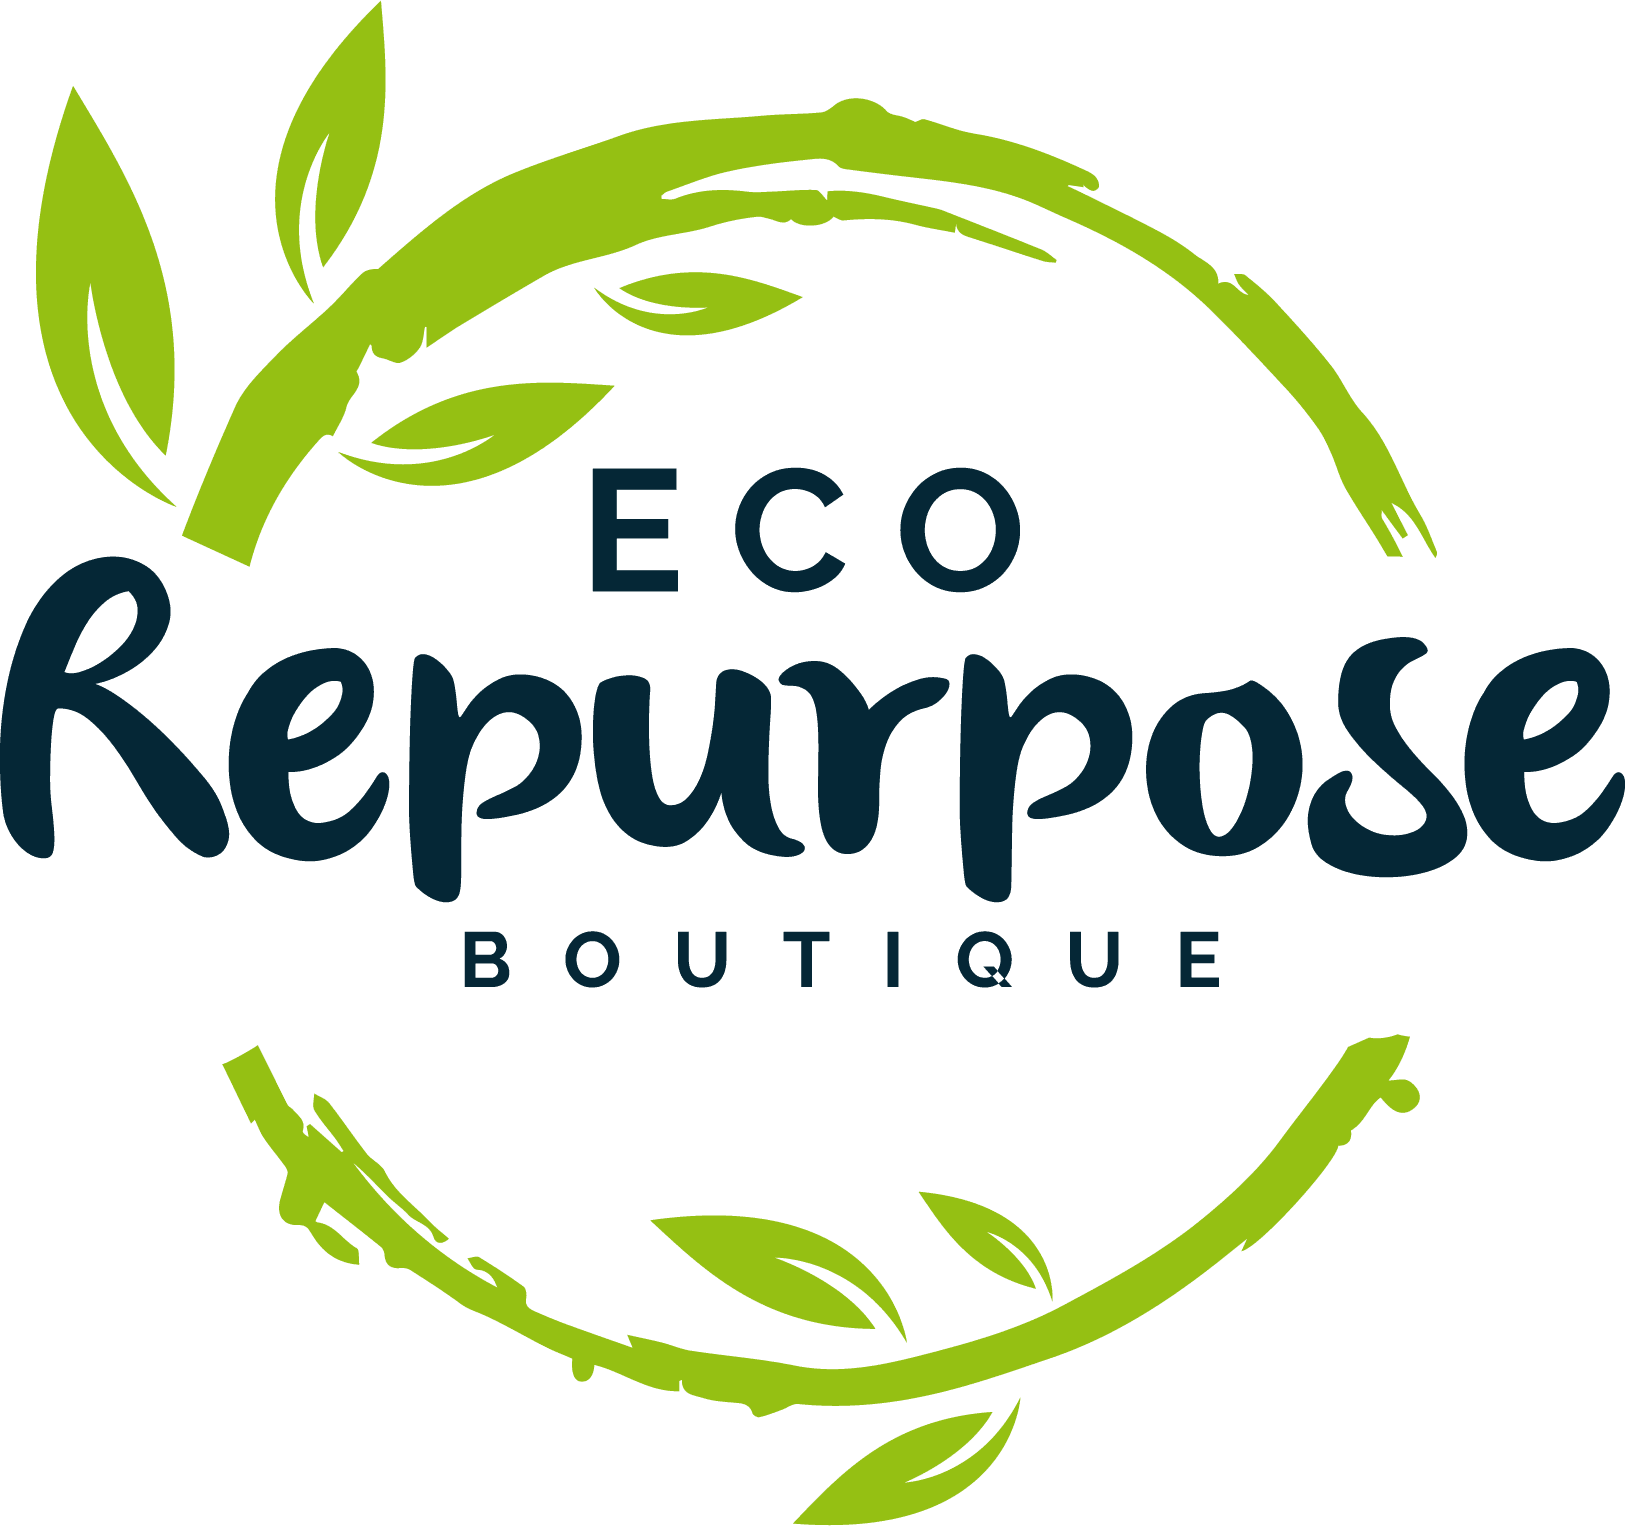 Eco Repurposed Boutique logo with black letters.